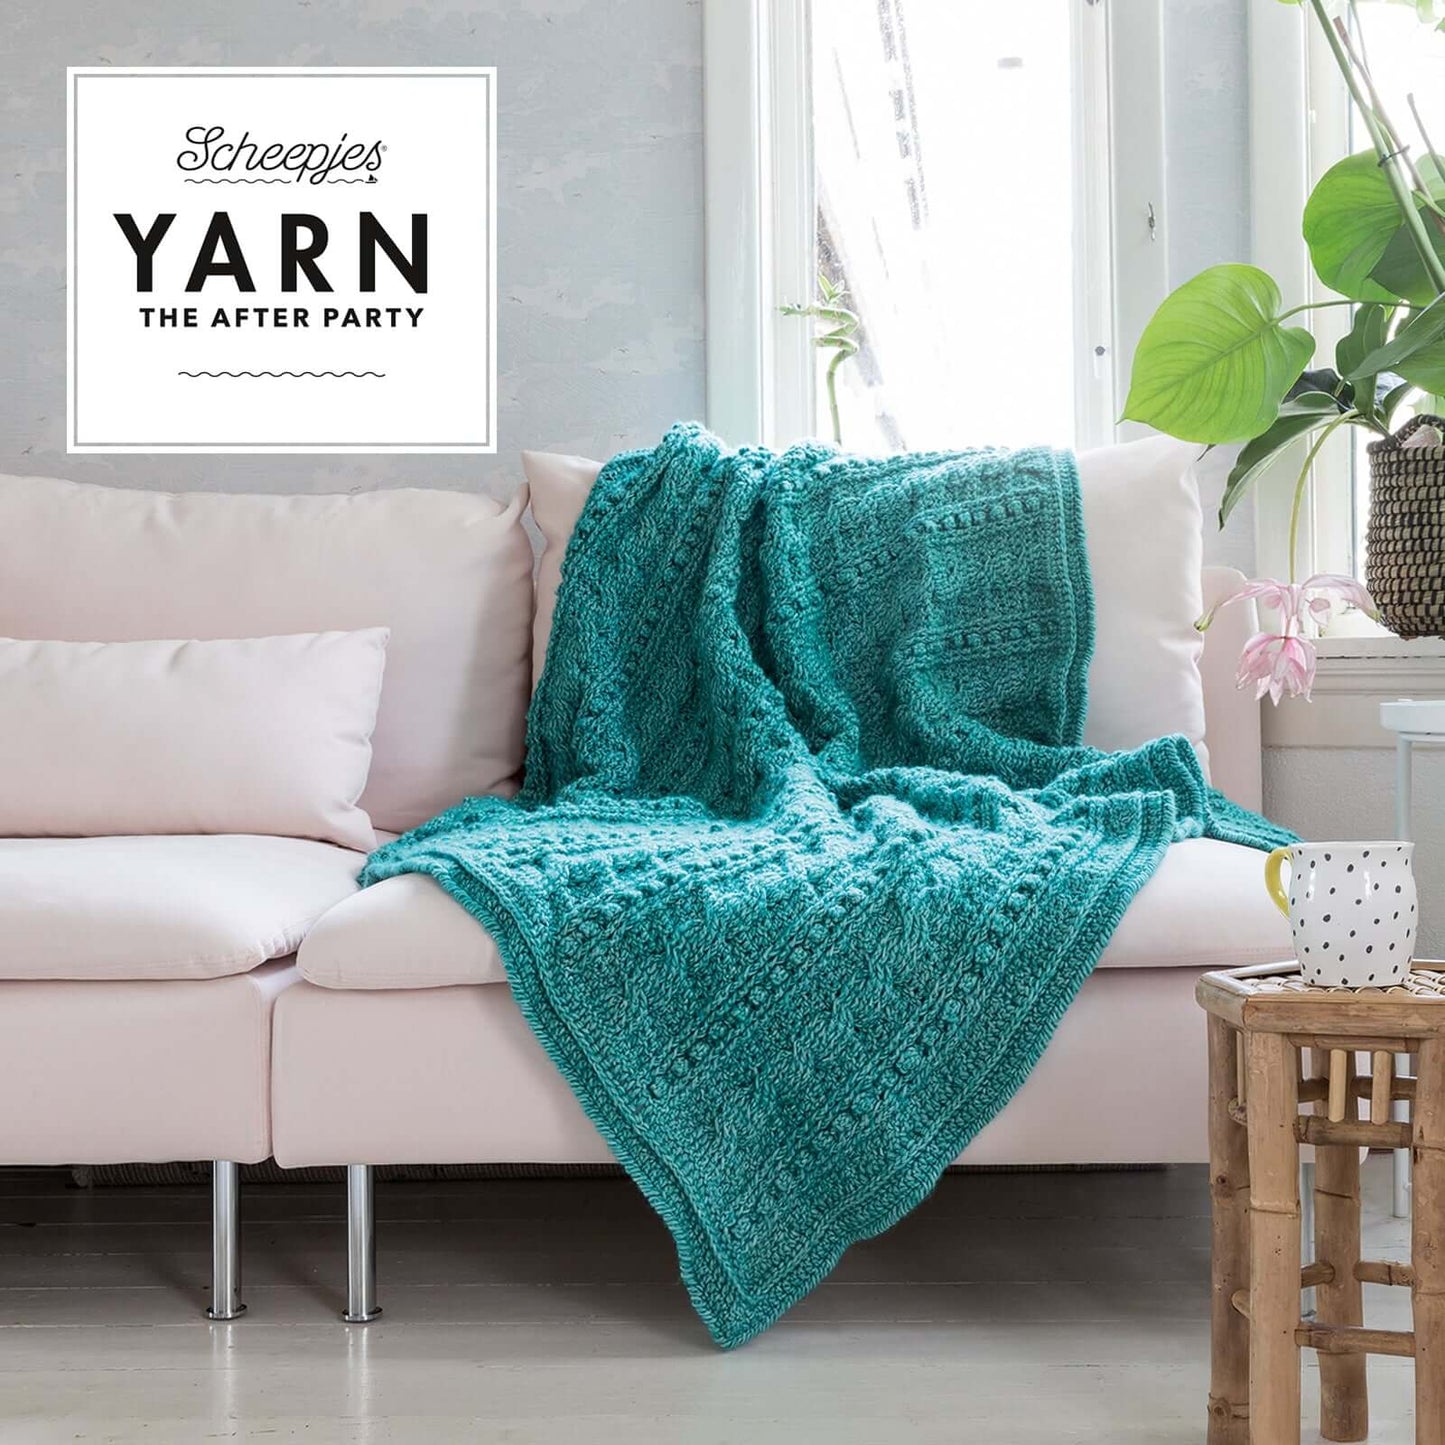 Scheepjes Yarn The After Party no. 24 - Popcorn & Cables Blanket (booklet) - (Crochet)